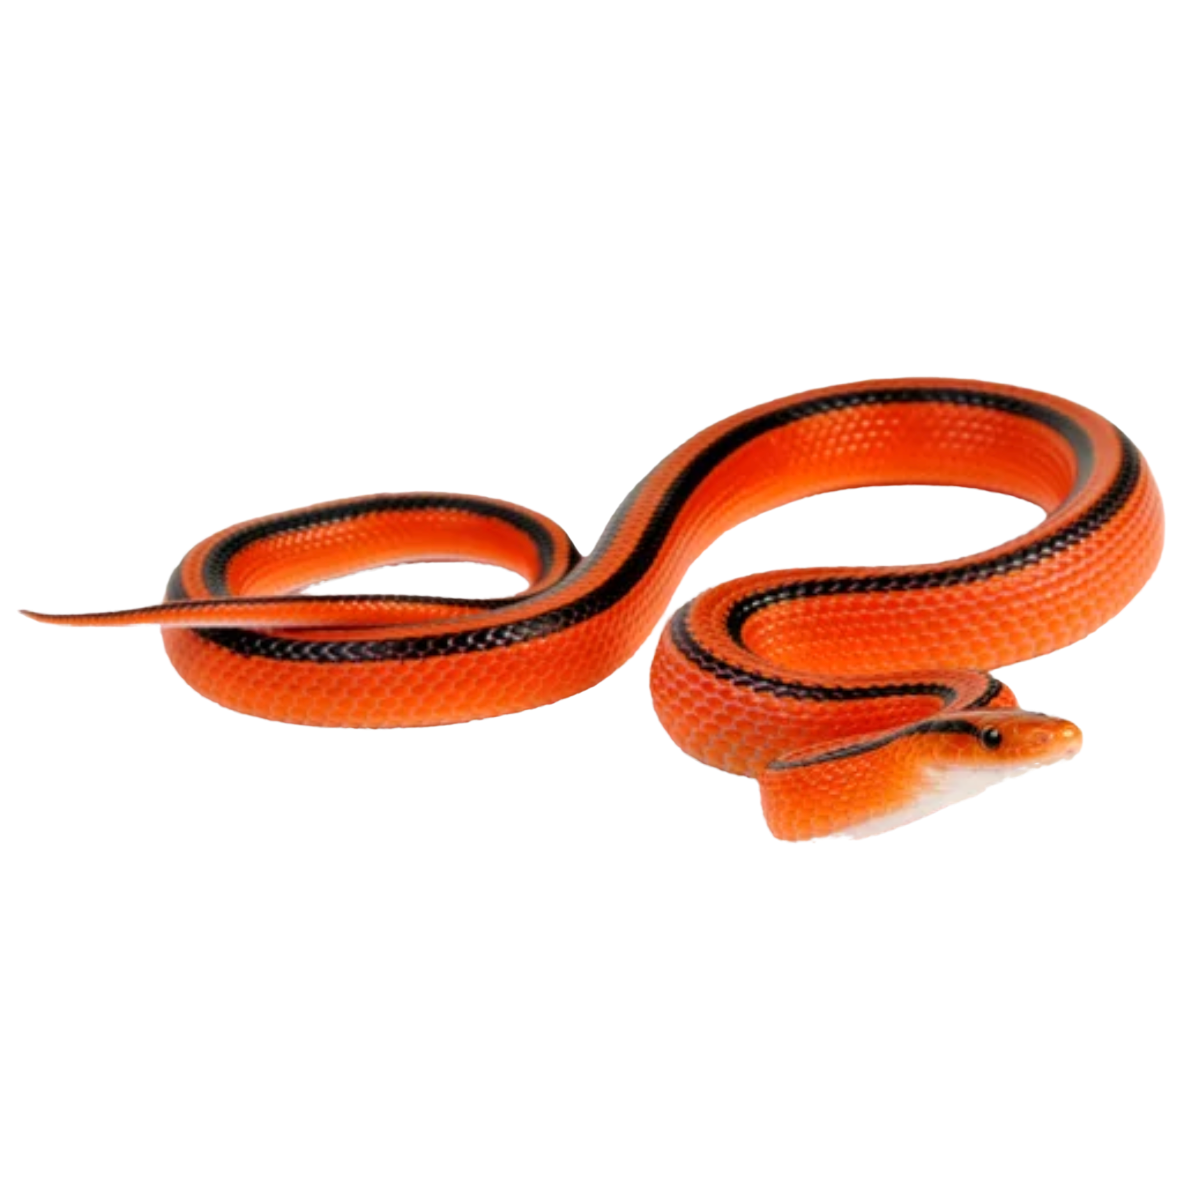 Best Substrate for a Thai Bamboo Rat Snake oreocryptophis porphyraceus coxi ReptiChip